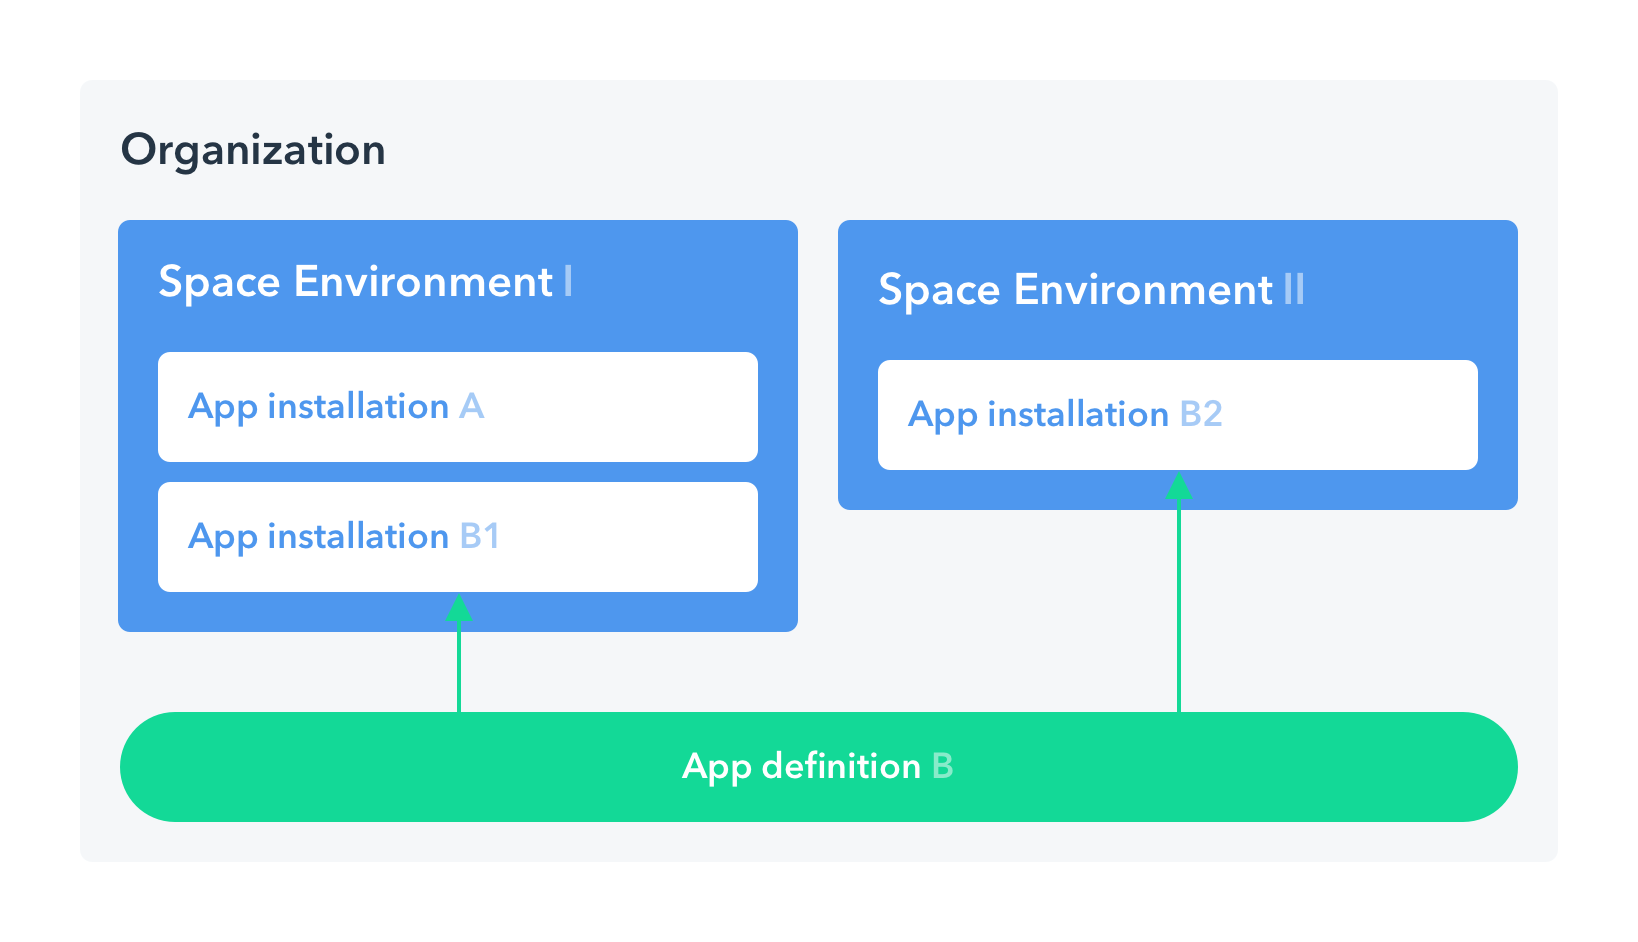 App definition and installations